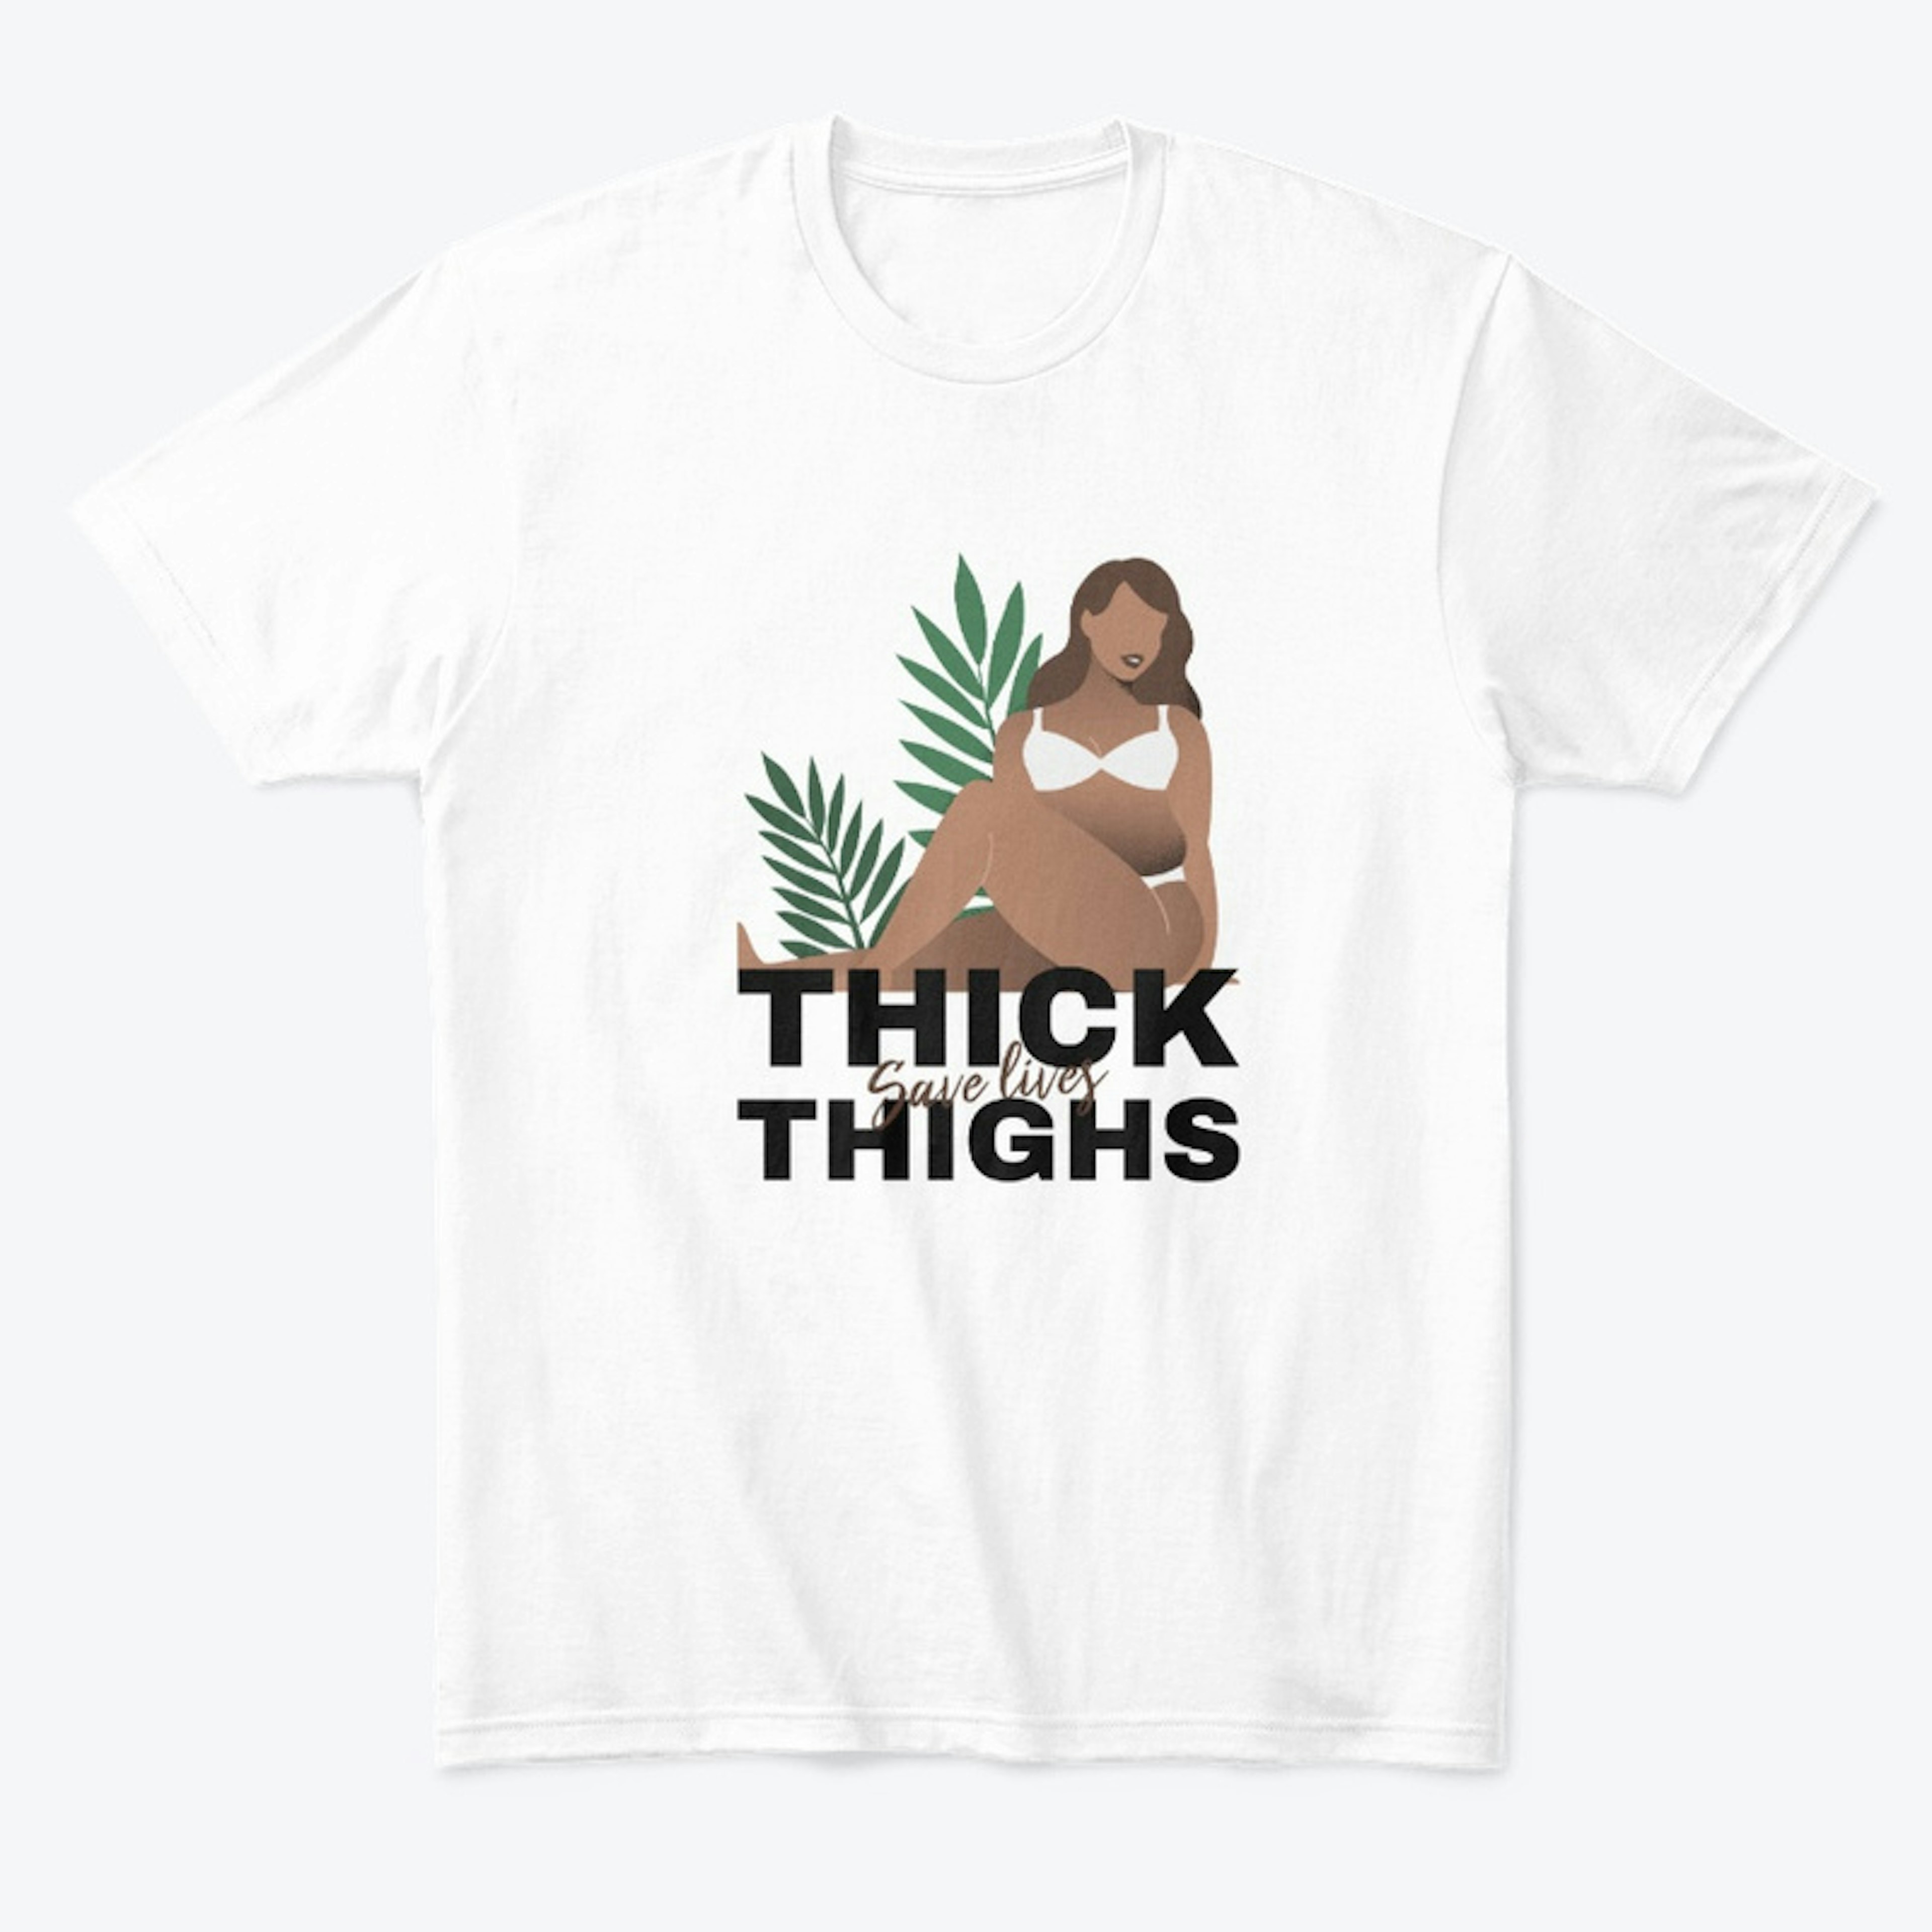 Thick Thighs Save Lives - Body Positive